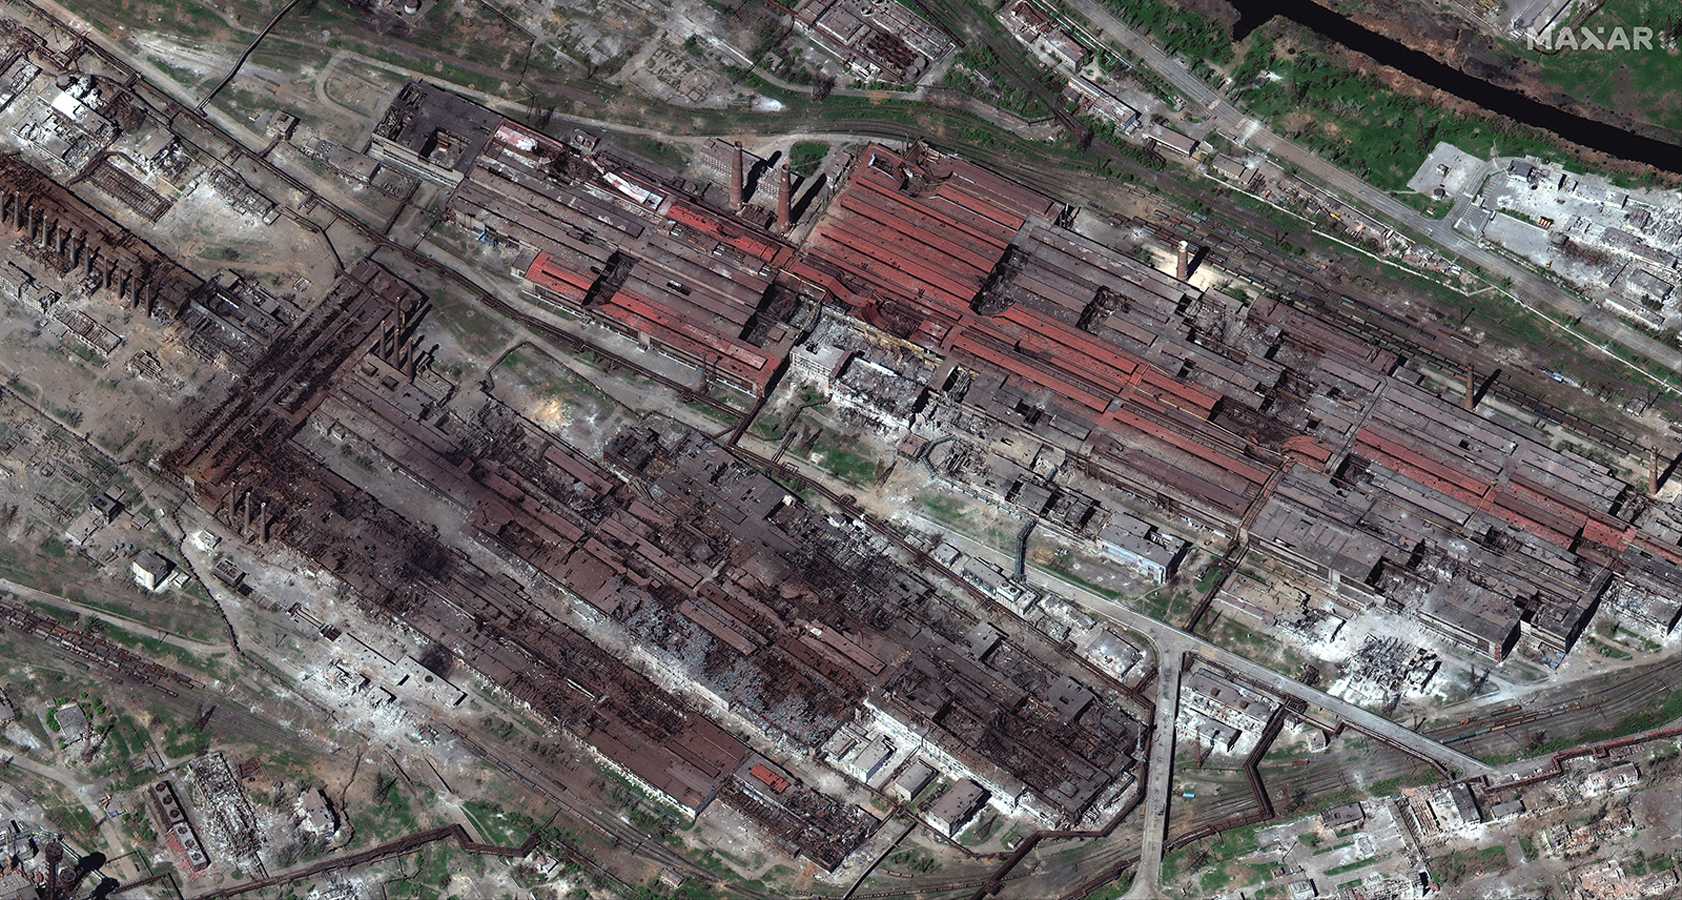 A satellite image shows an overview of the Azovstal steel plant, the site of Ukrainians last military holdout which is also serving as a civilian shelter in Mariupol, Ukraine on April 29.